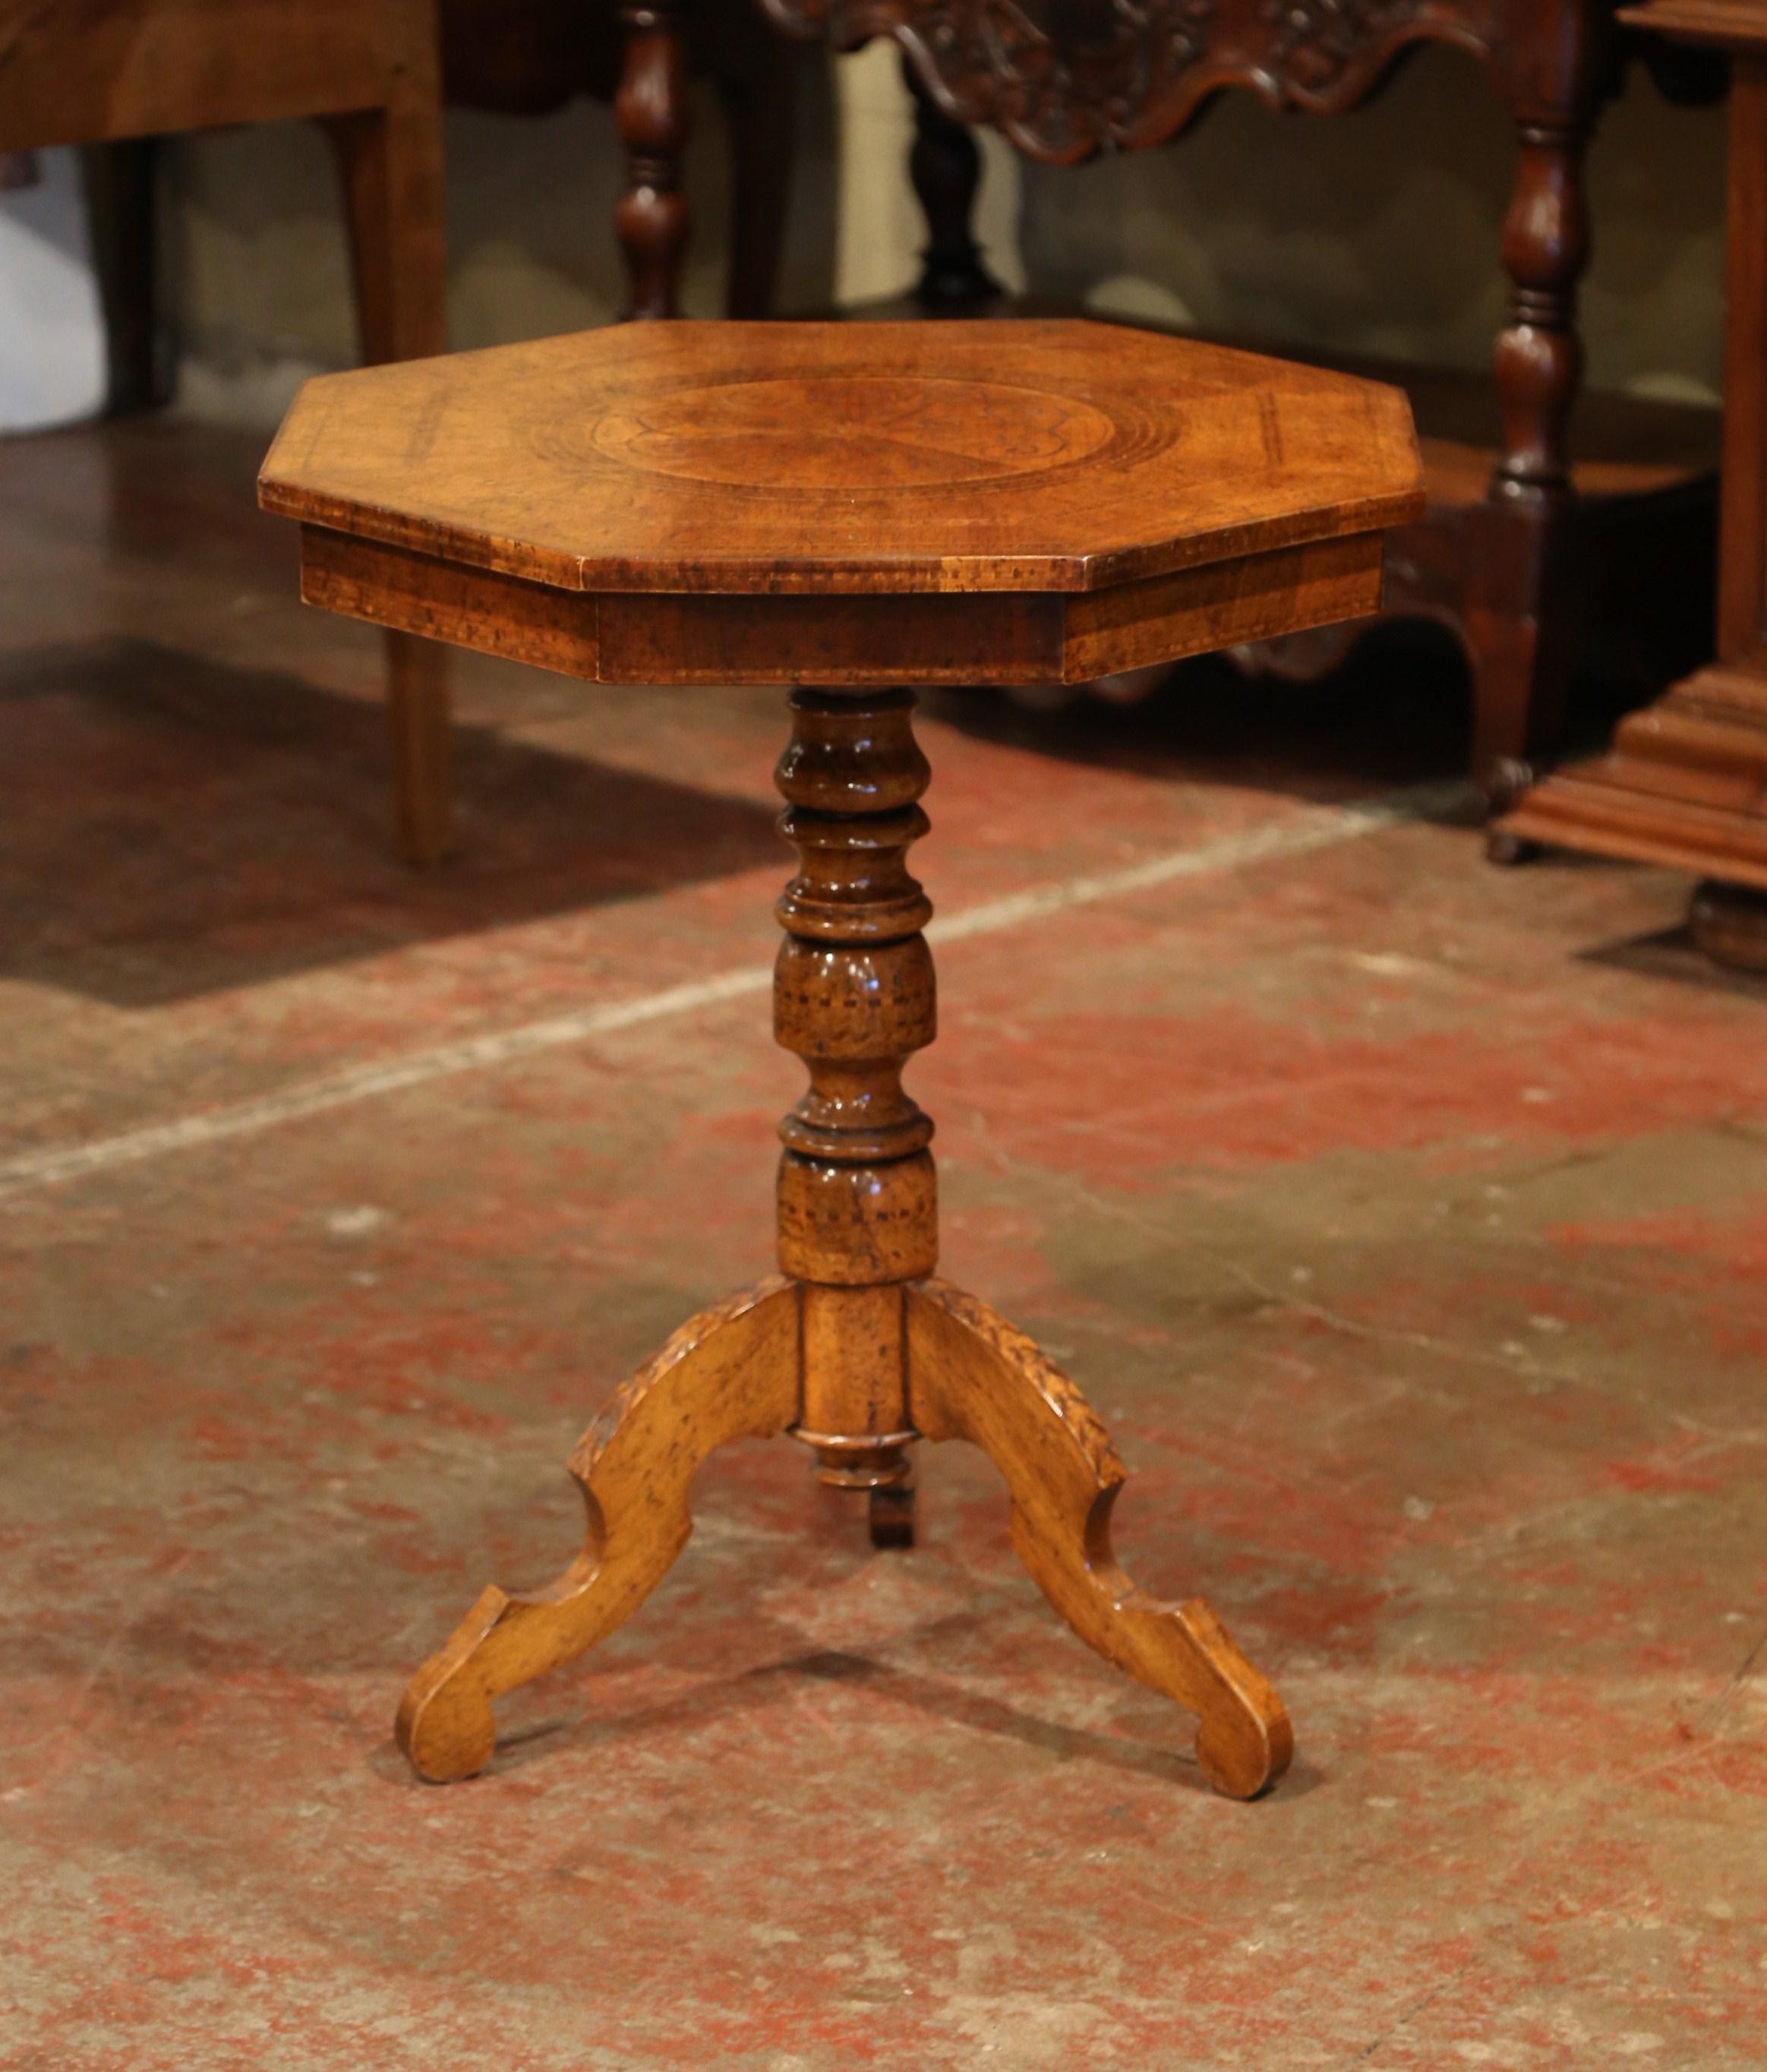 Contemporary French Octagonal Carved Walnut Pedestal Gueridon Table with Inlay Decor